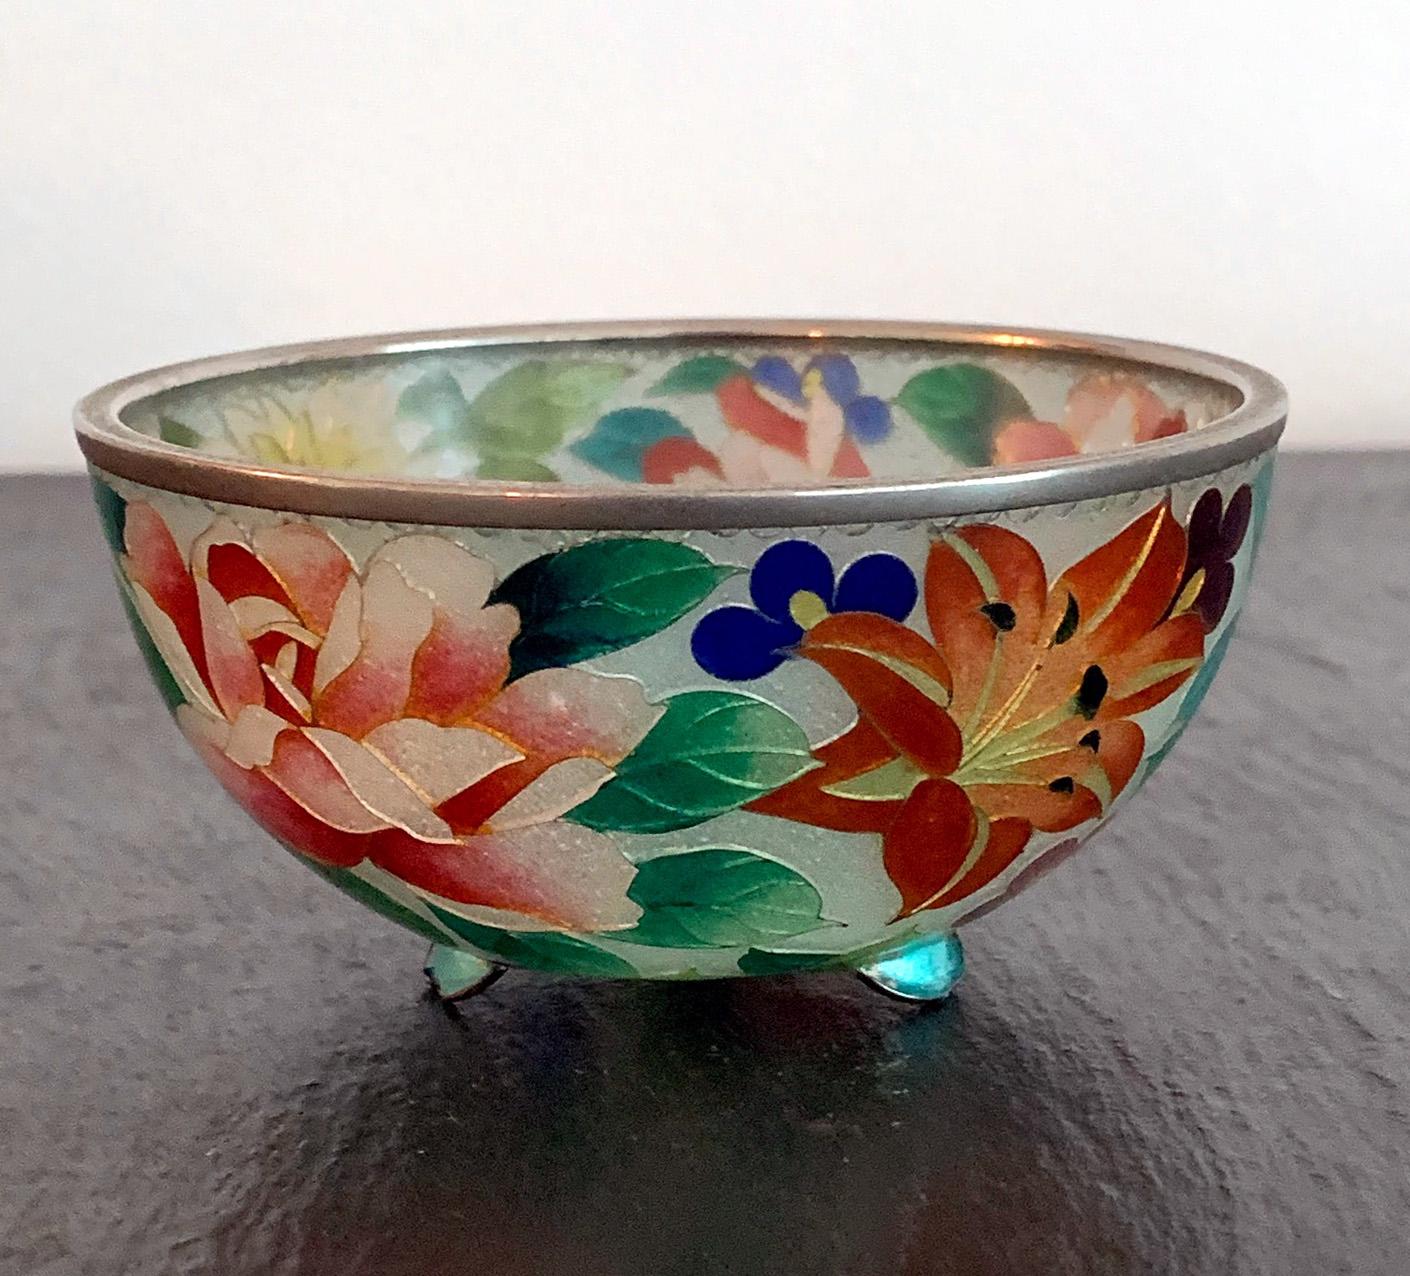 A small but exquisite Plique-a-jour cloisonne bowl from Nagoya area in Japan dated to 1900-20s. Maker's unknown but possibly by Ando company. Very similar pieces can be found in the collection of V&A museum (reference number FE.12-2011 and